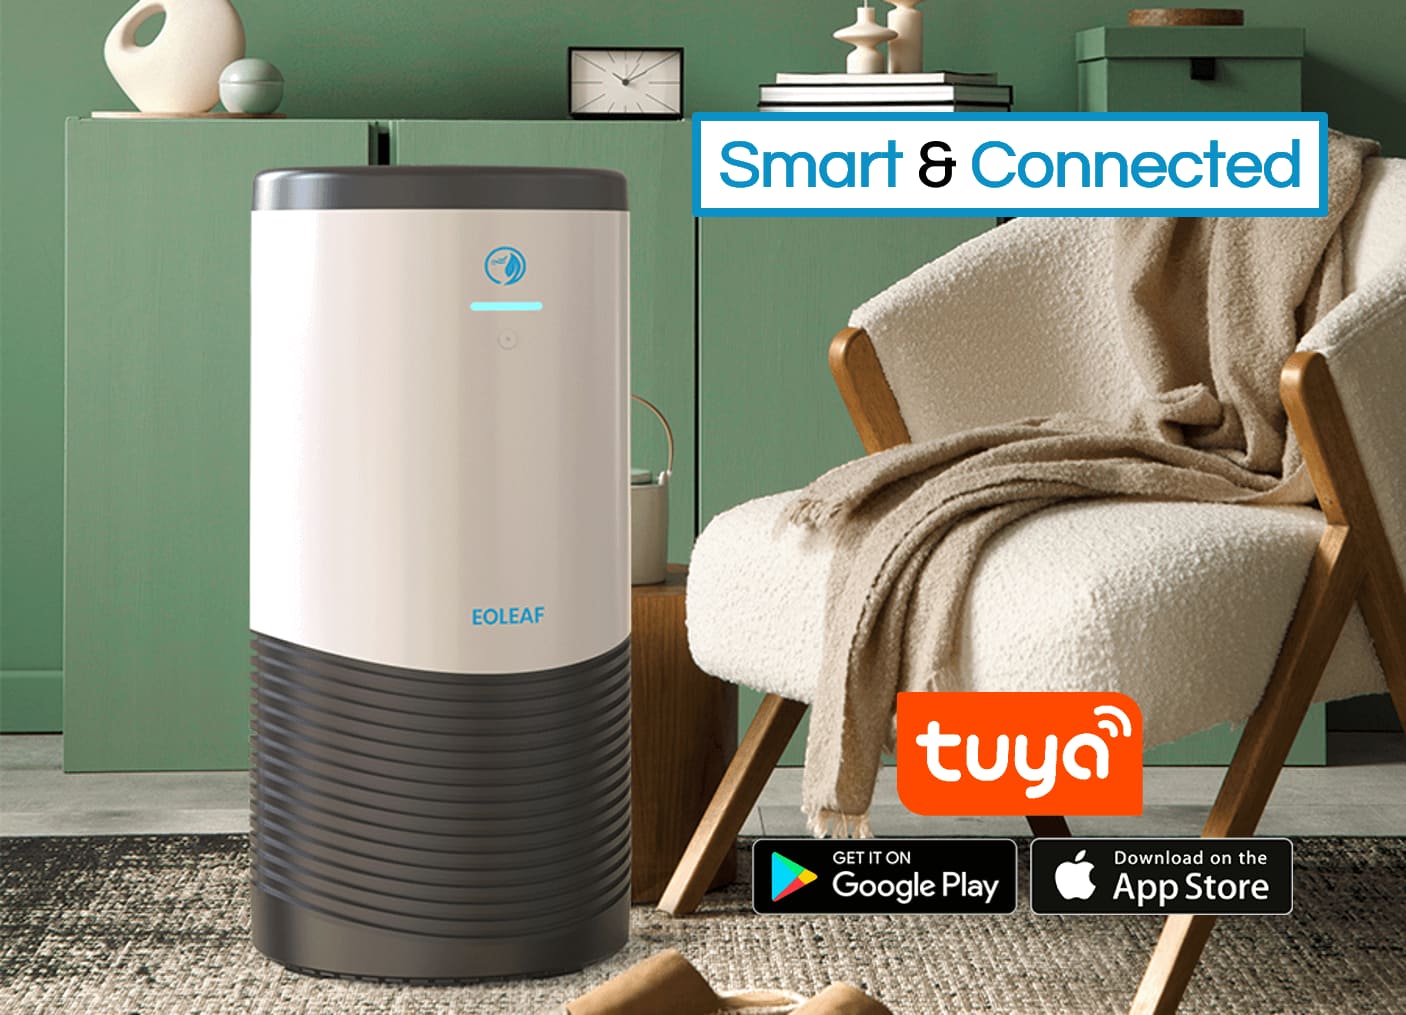 Smart air purifier - Wi-Fi capable - Connected to smartphone app 